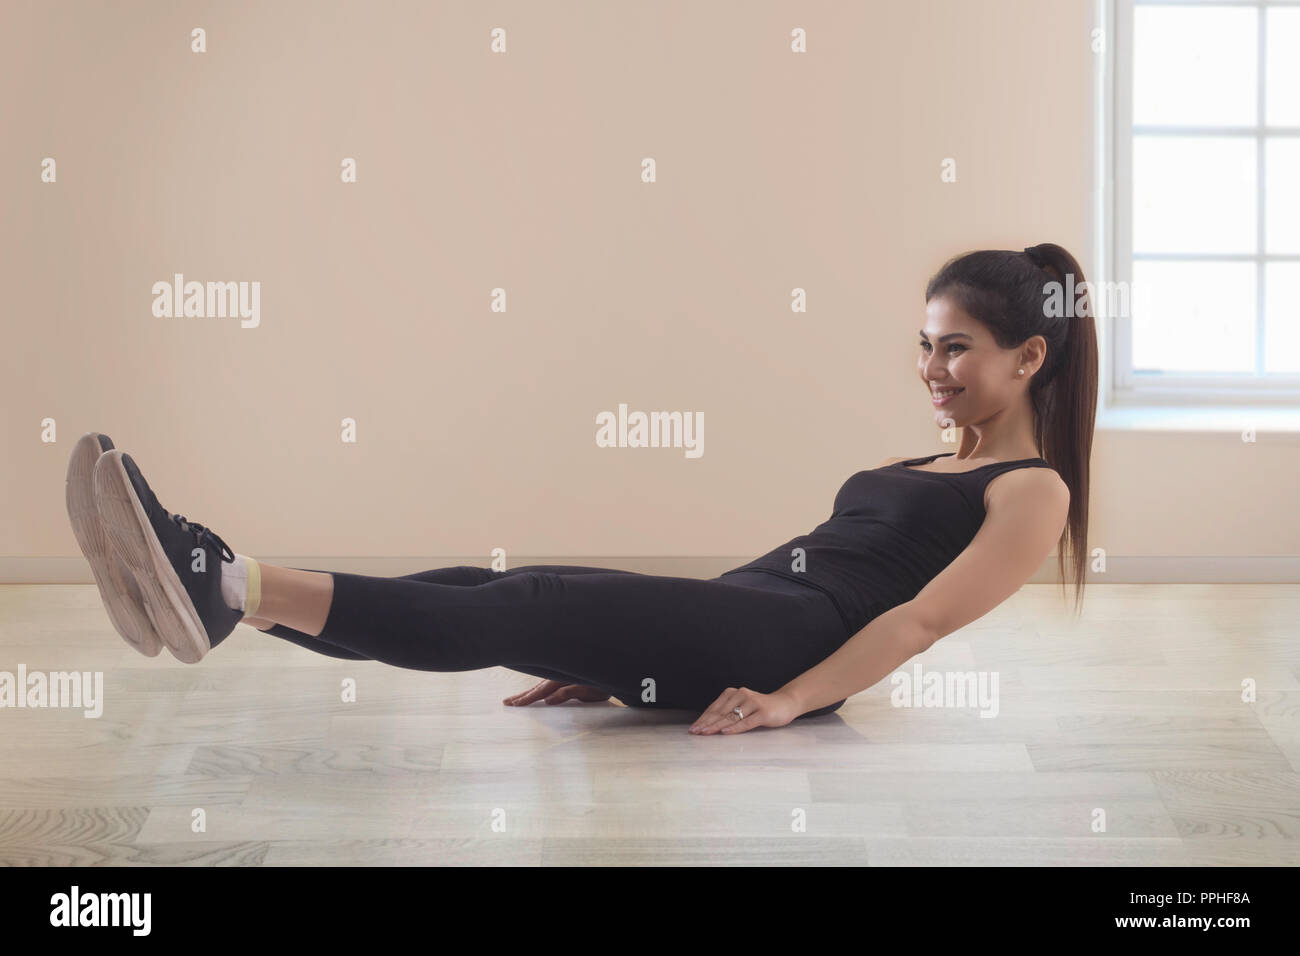 Smiling young woman in workout clothes doing abs exercises on the floor. Stock Photo